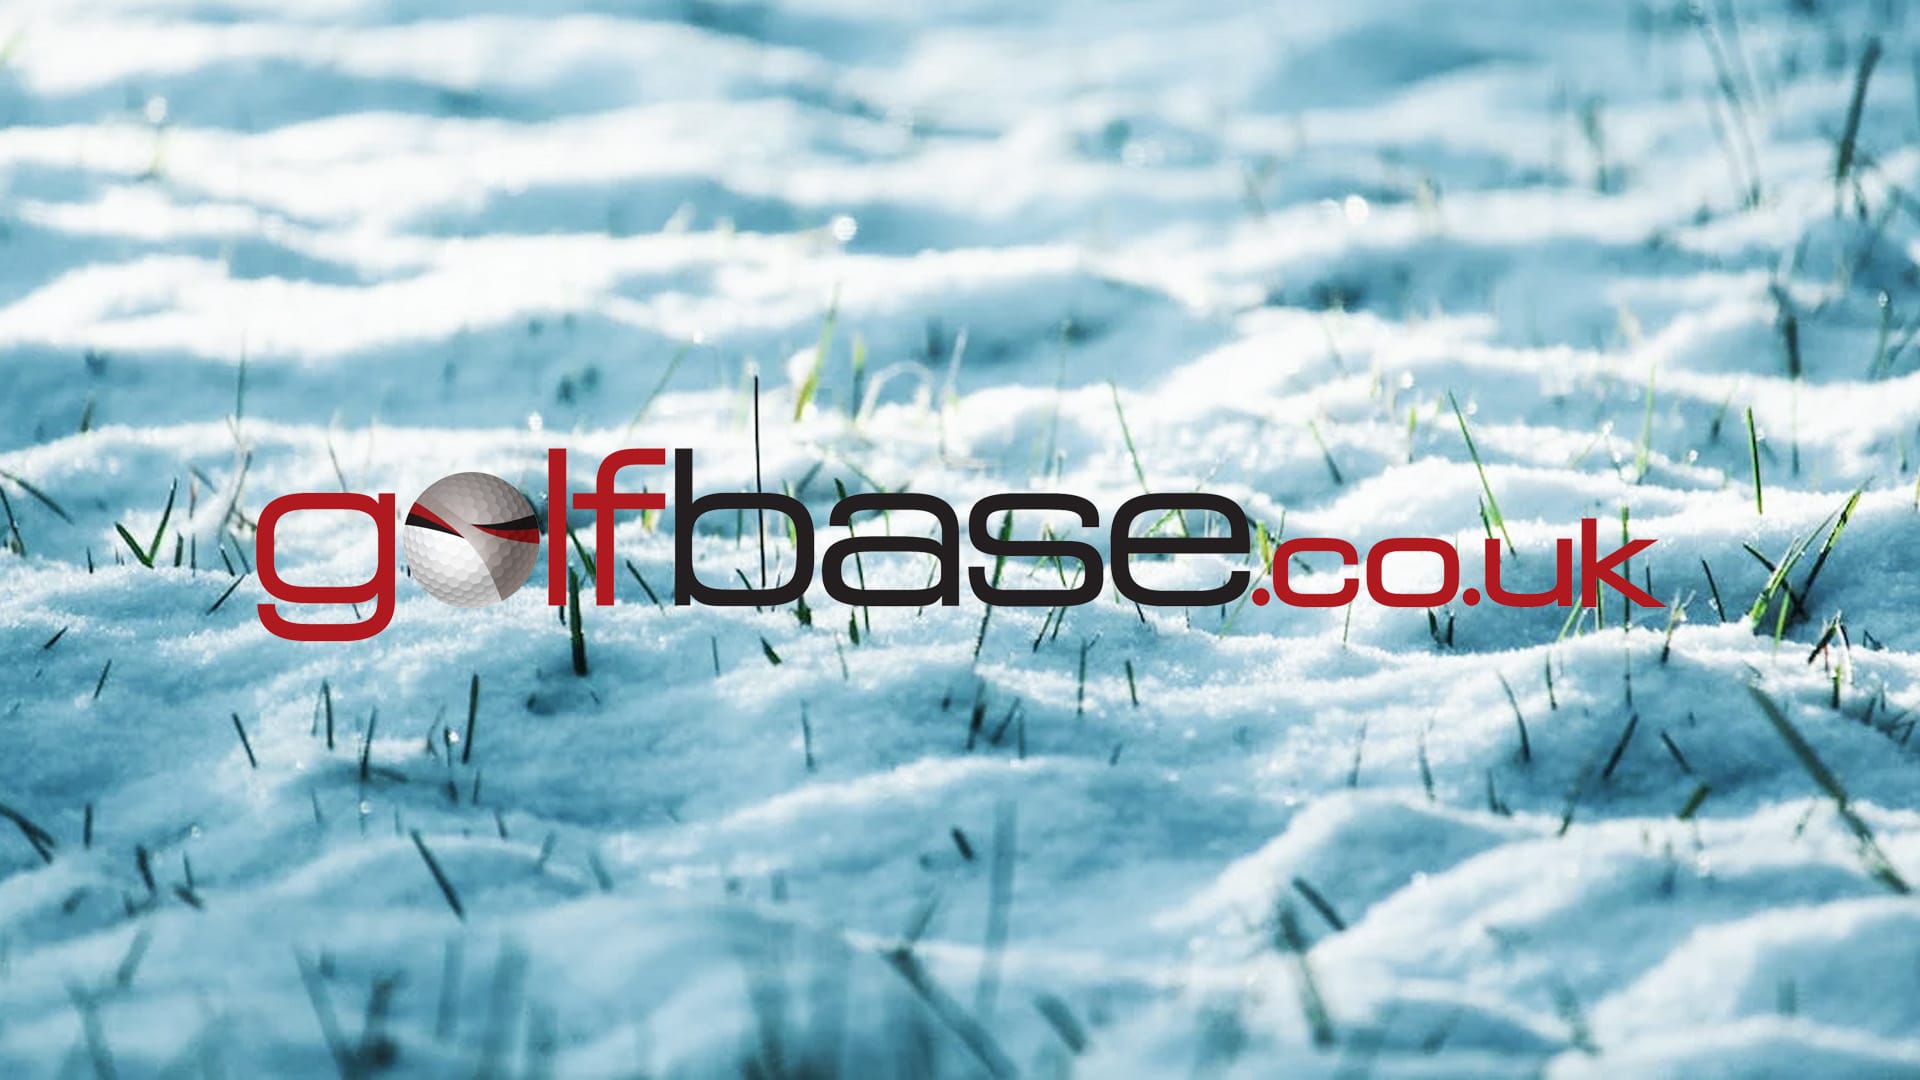 Grass poking through snow in the sunshine with the Golfbase.co.uk logo in front